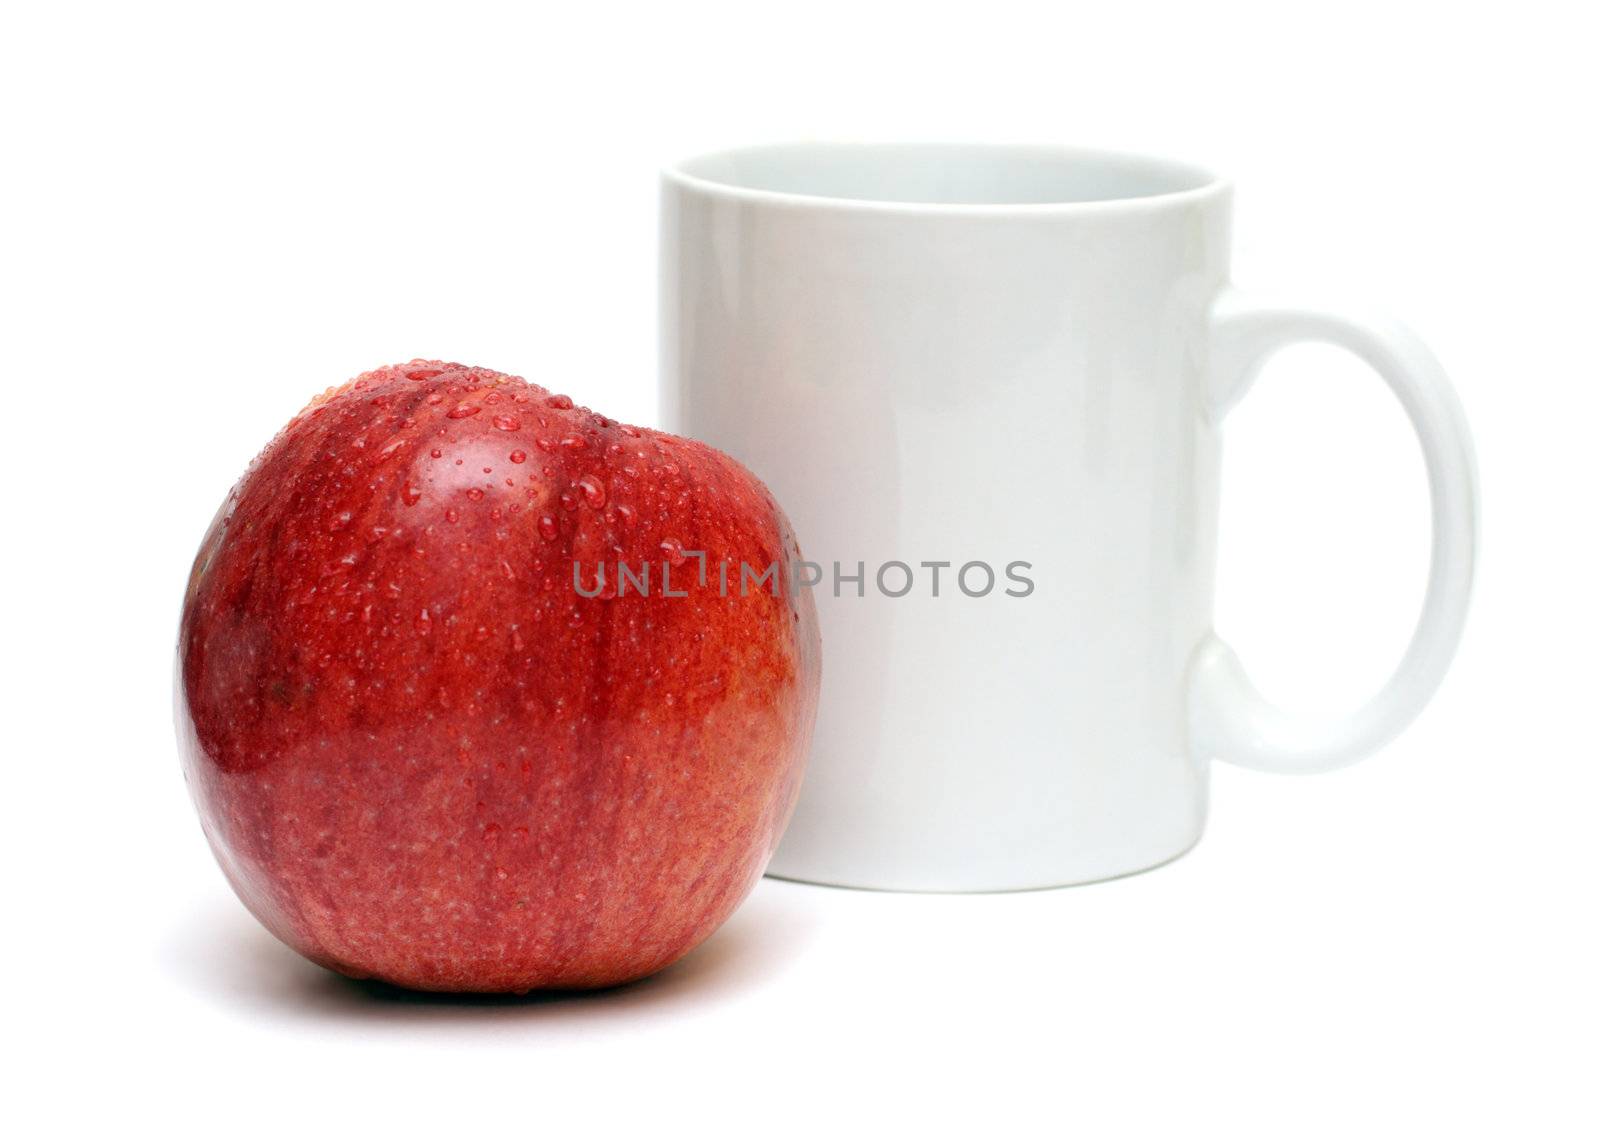 red apple and white mug isolated on white